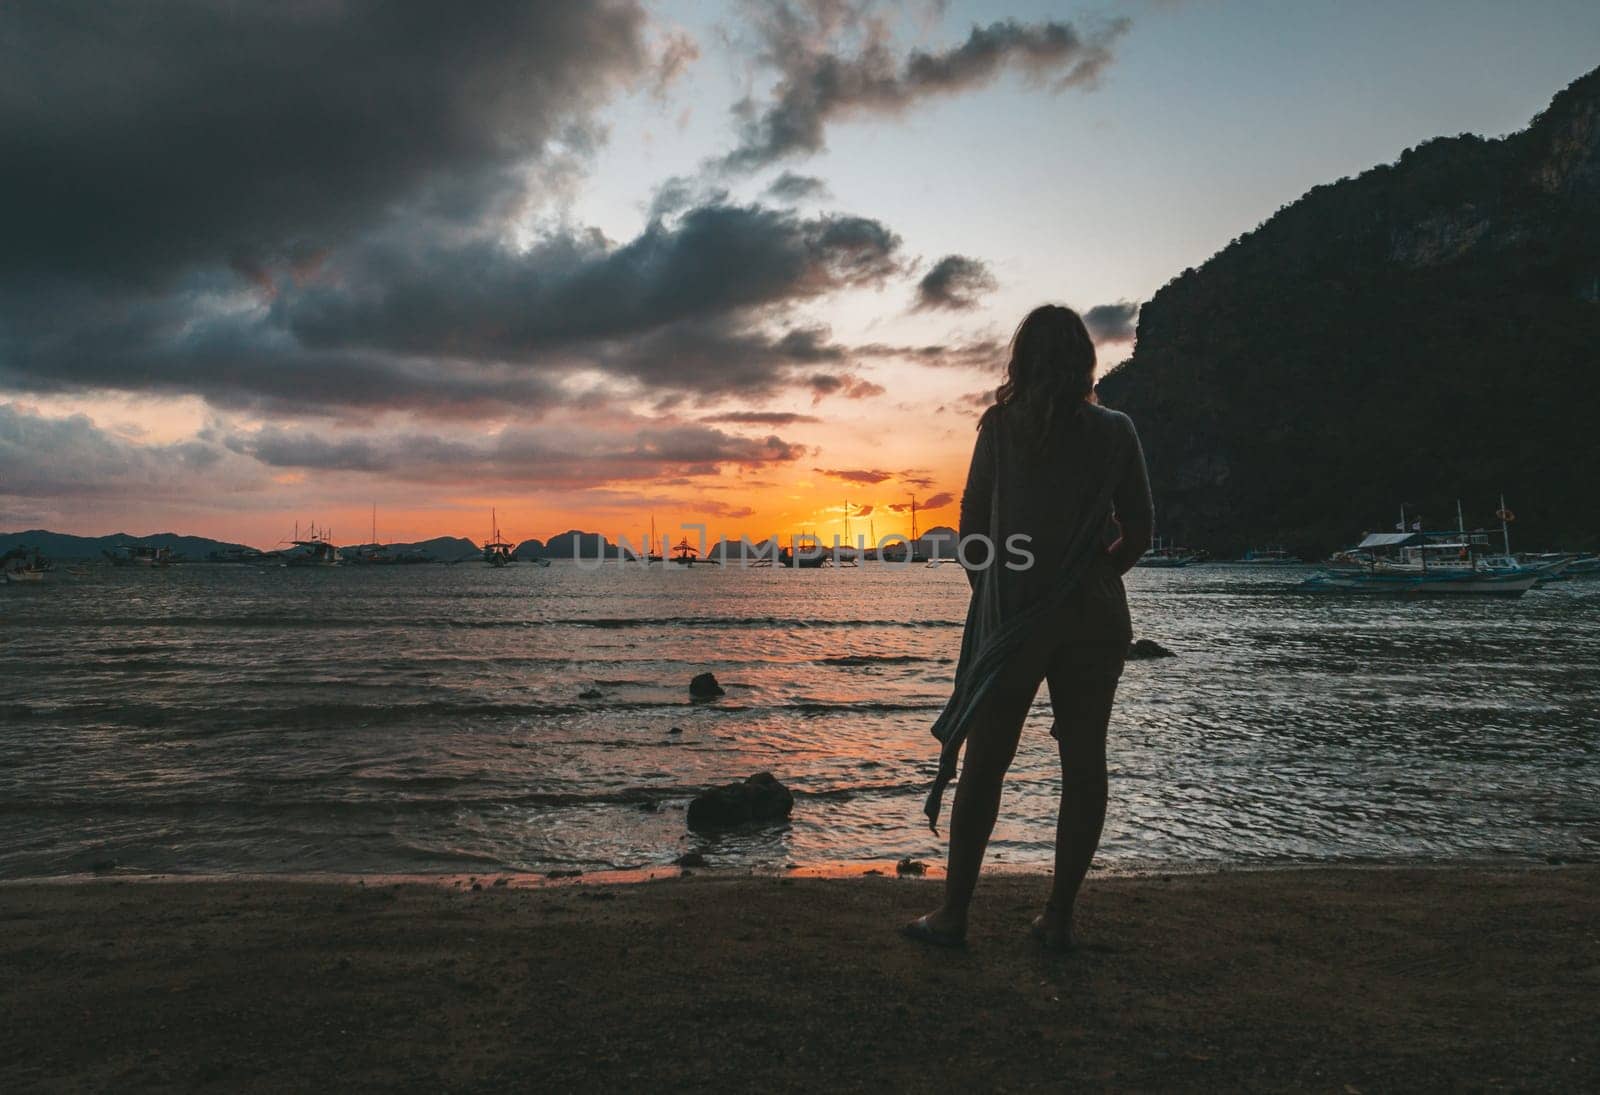 Silhouette of woman watching sunset at beach. El Nido, Palawan, Philippines. by Busker